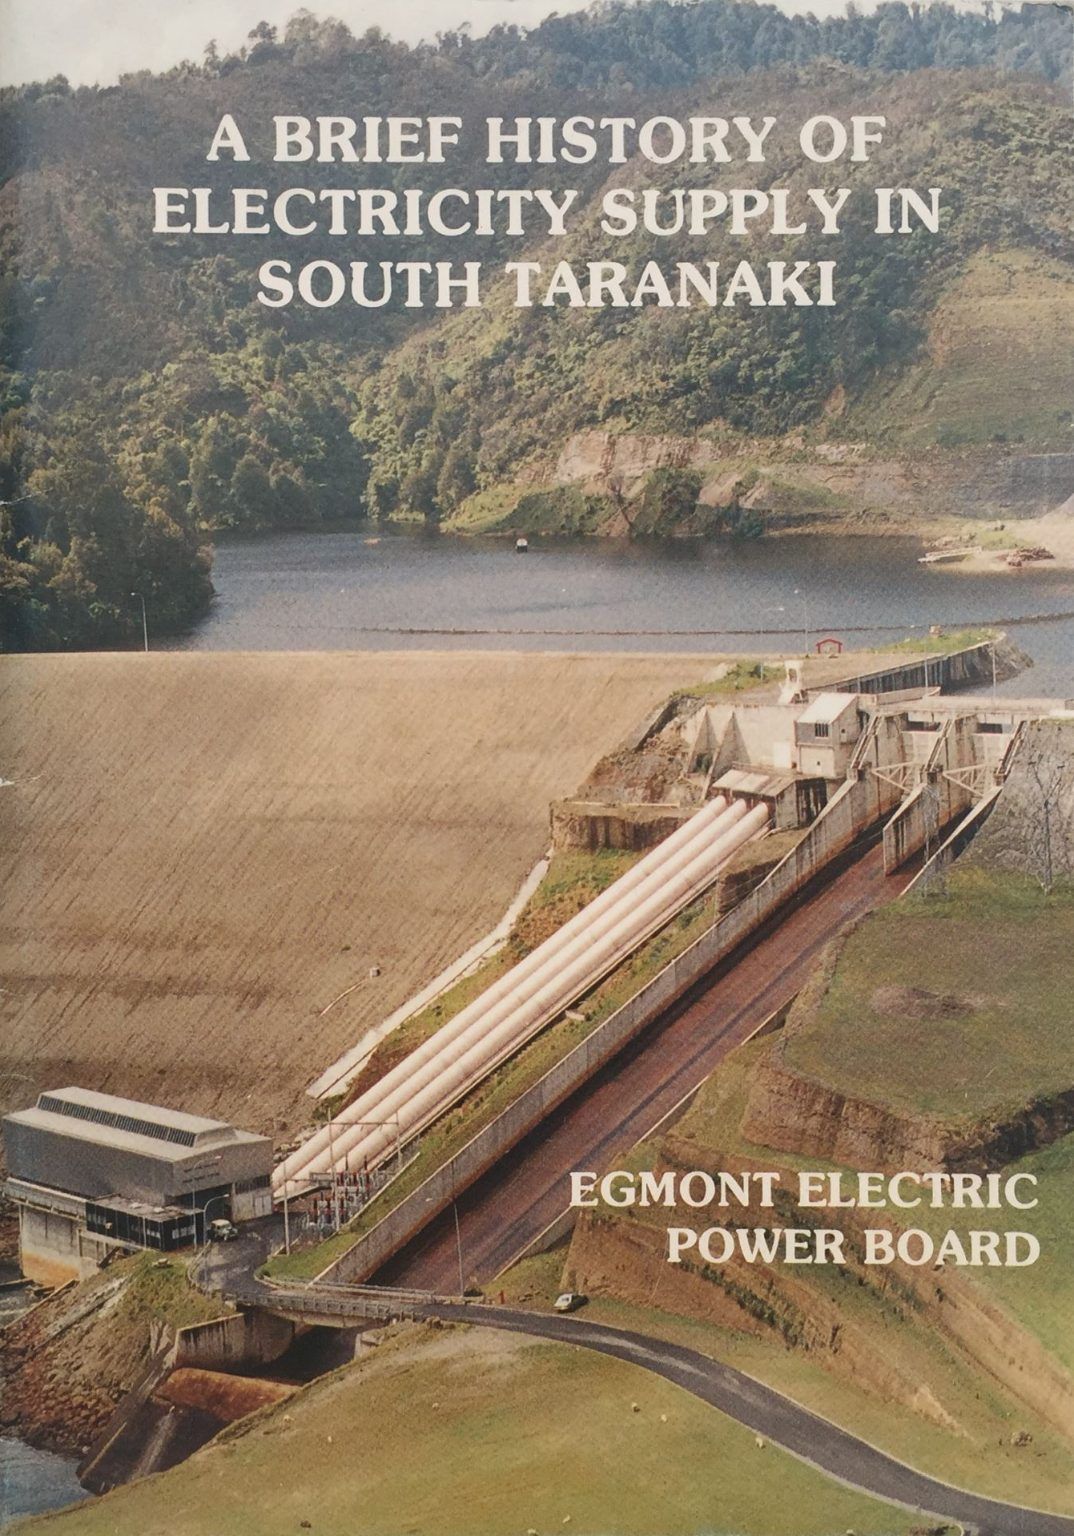 A Brief History of Electric Power in the South Taranaki